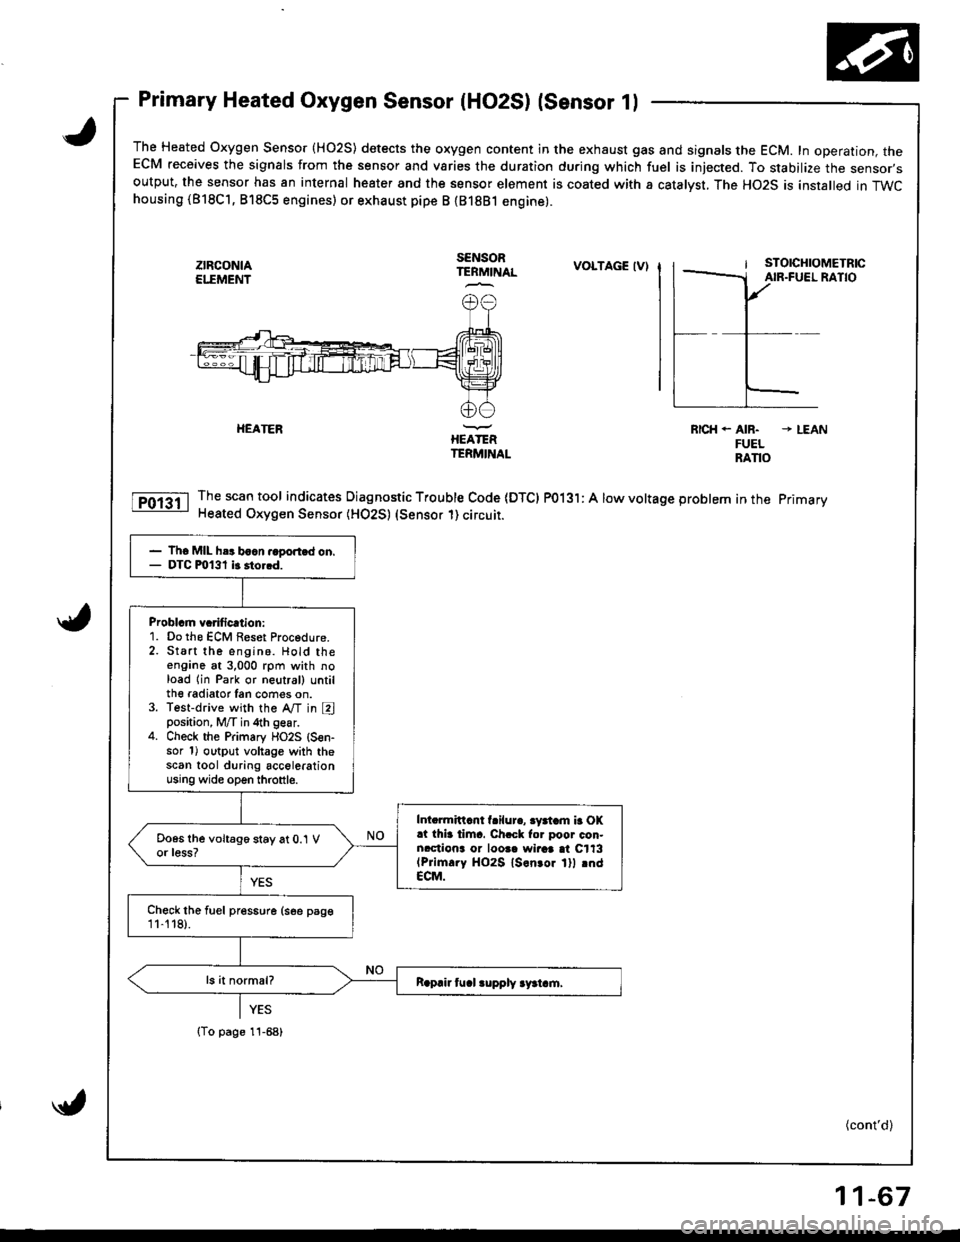 HONDA INTEGRA 1998 4.G Service Manual Primary Heated Oxygen Sensor (HO2S) lsensor 1l
The Heated Oxygen Sensor {HO2S) detects the oxygen content in the exhaust gas and signals the ECM. In operation, theECM receives the signals from the sen